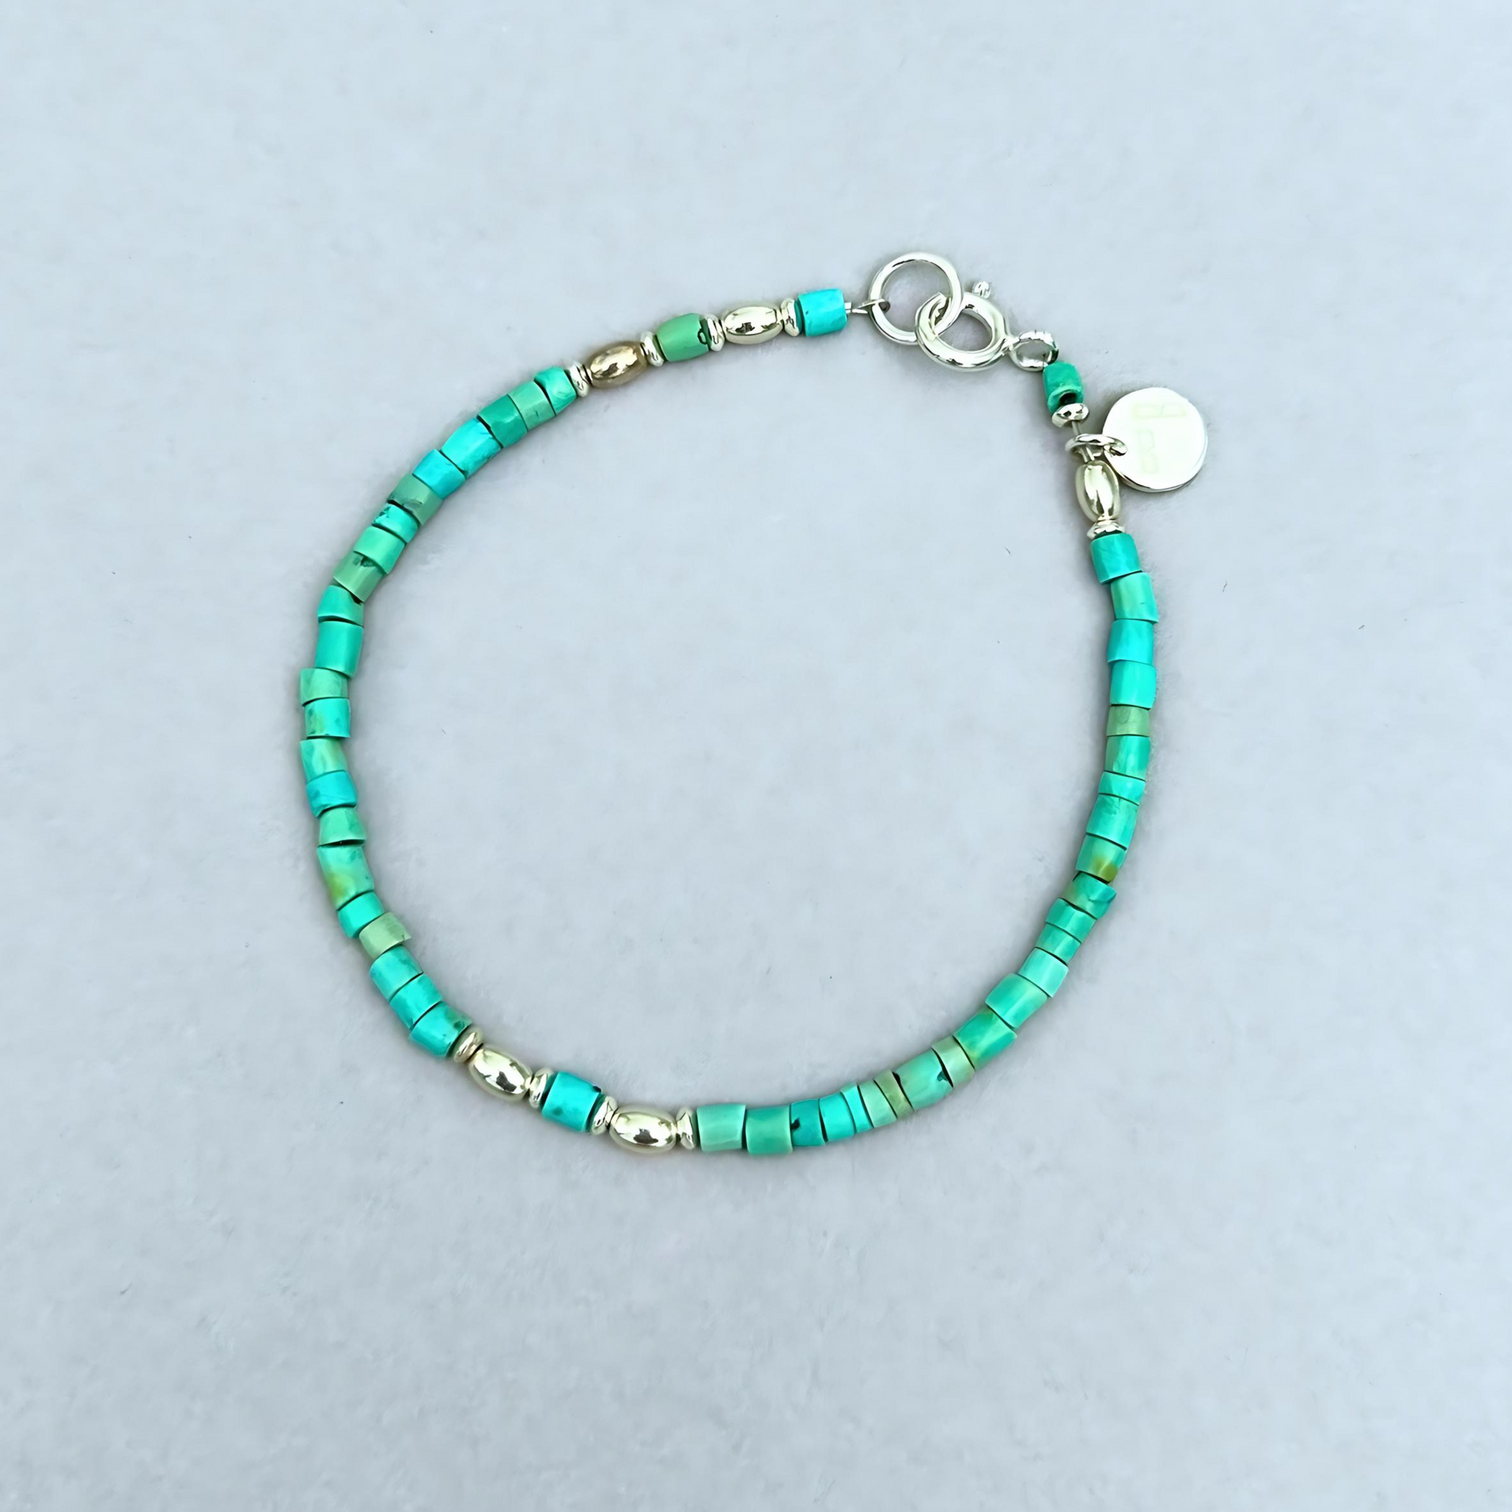 The LeBijouBijou Yara Bracelet is made with Turquoise Rondelles and a touch of silver